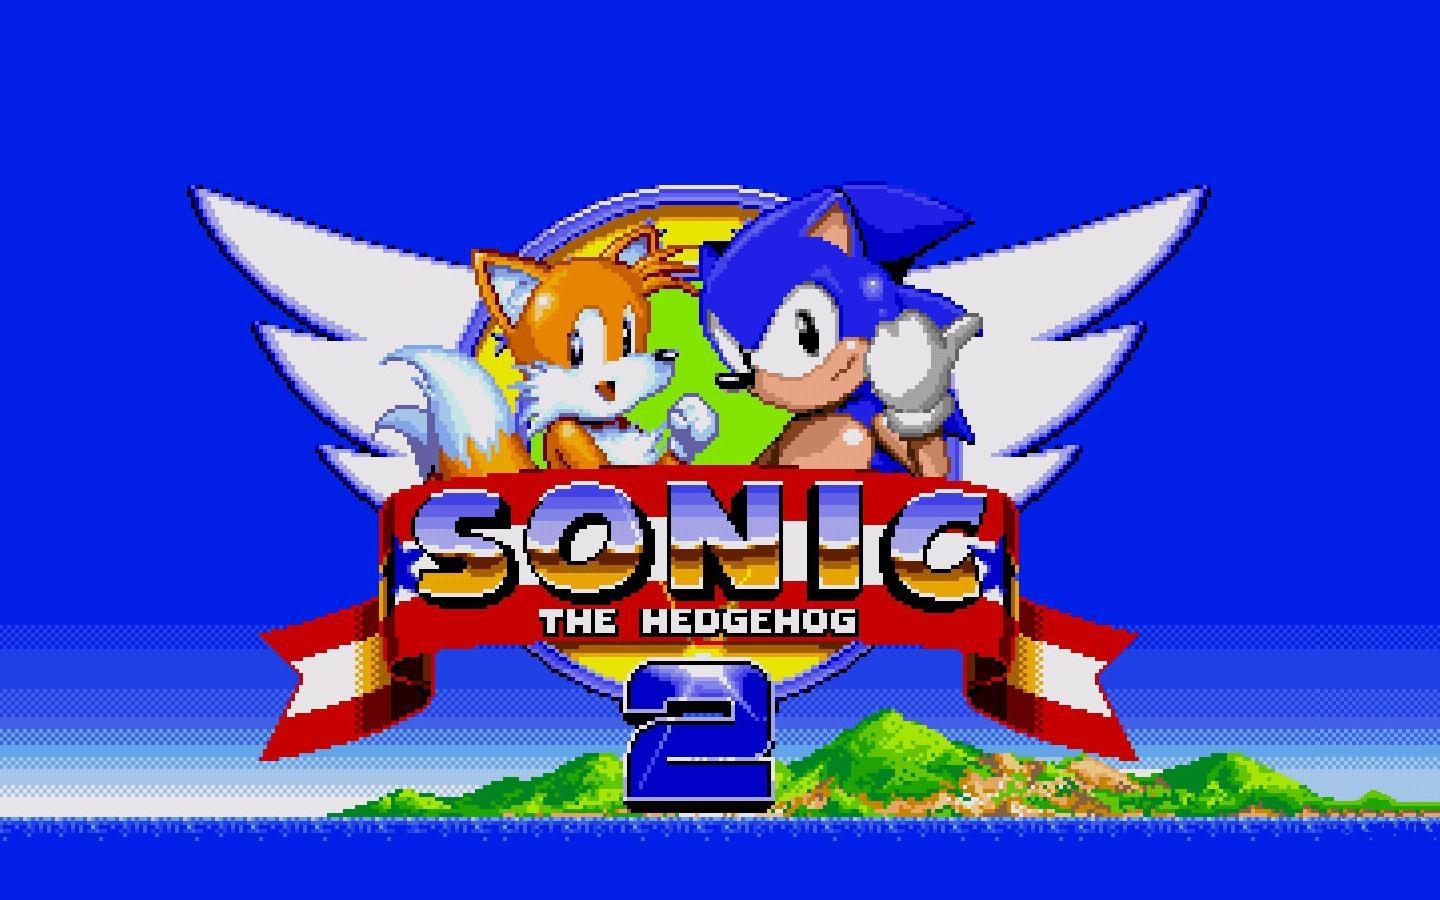 sonic the hedgehog 2, video game, miles 'tails' prower, sonic the hedgehog, sonic